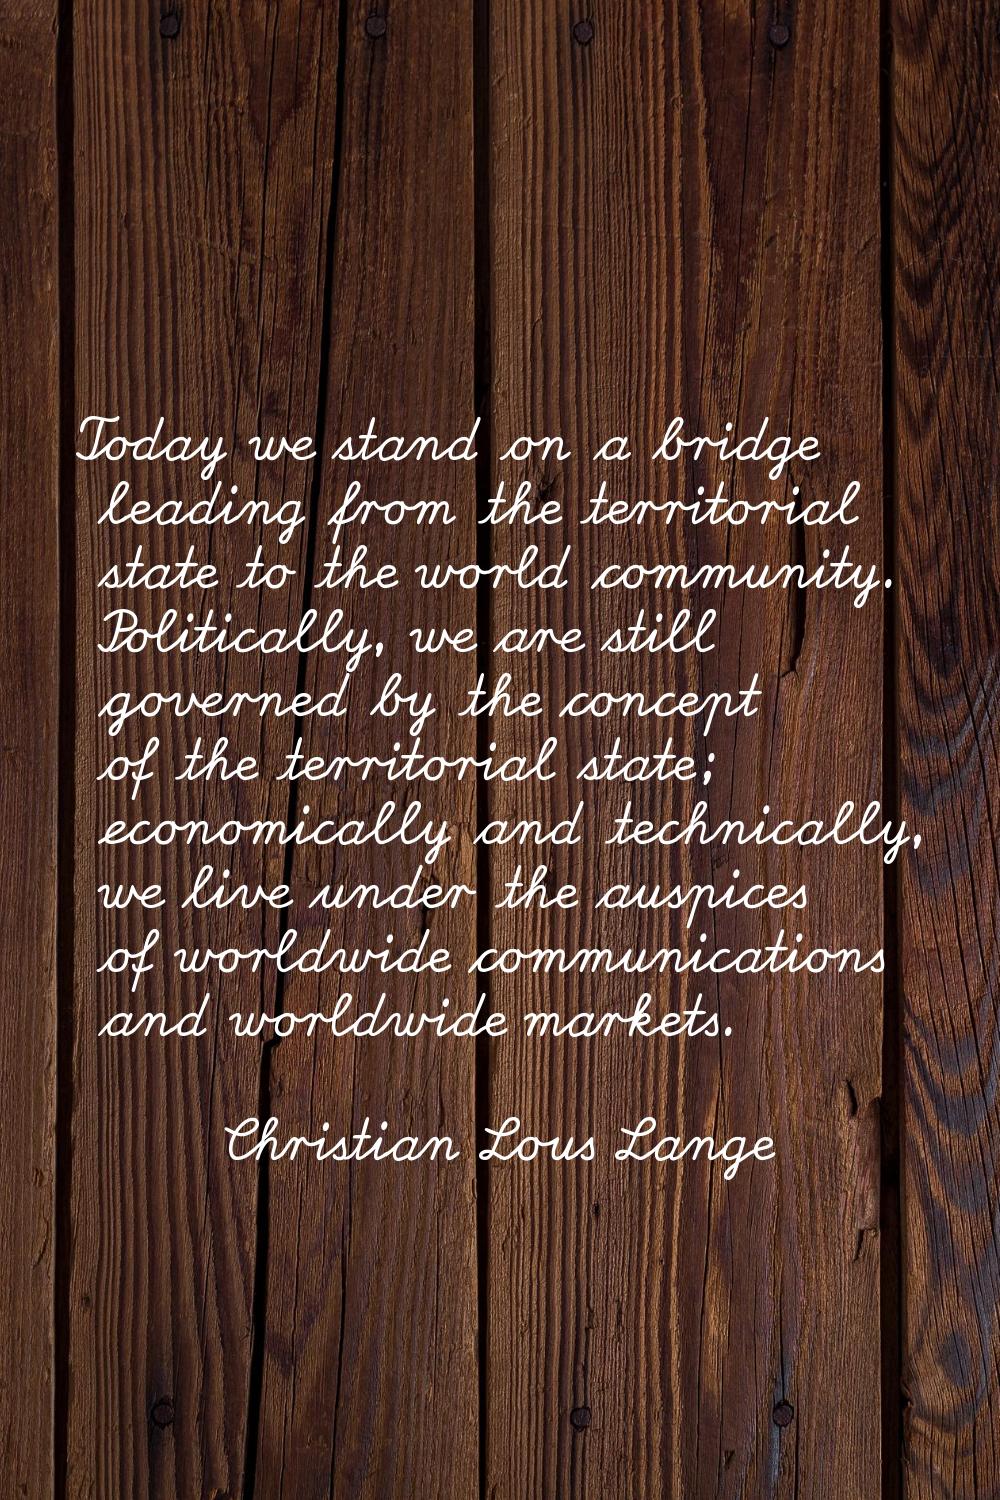 Today we stand on a bridge leading from the territorial state to the world community. Politically, 